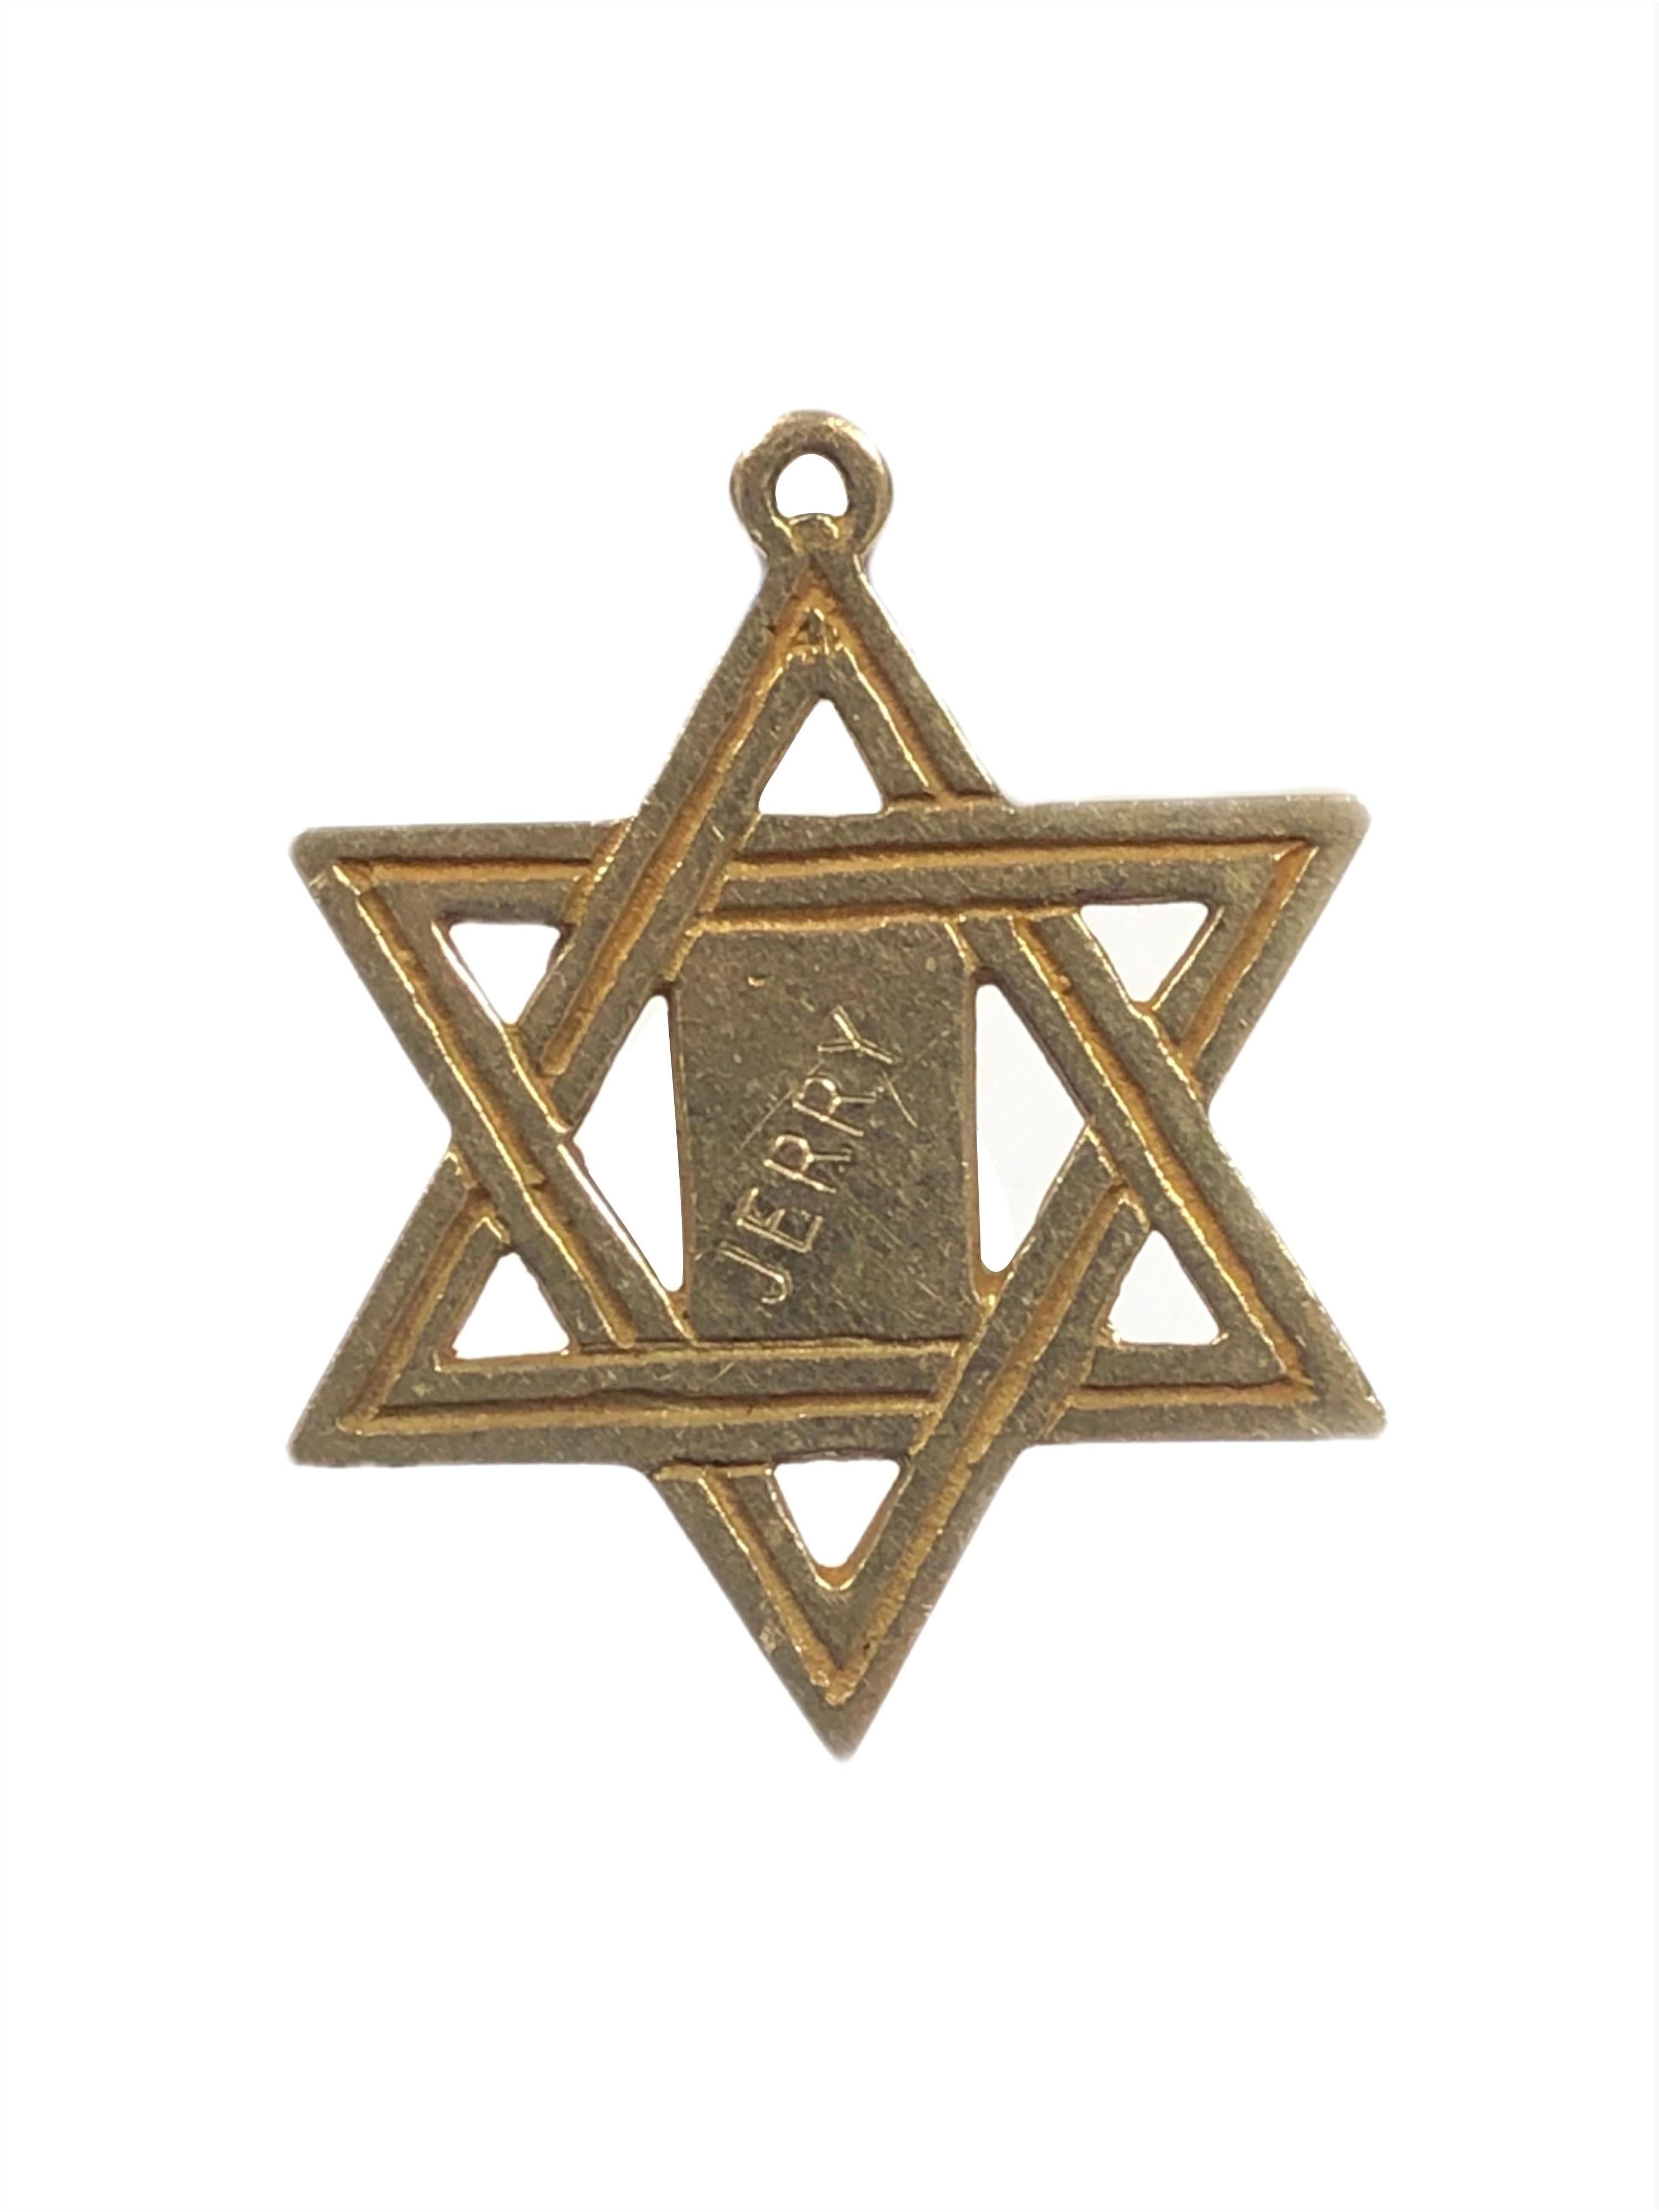 Owned and Worn by Hollywood Icon Jerry Lewis is this Circa 1960s 14K Yellow Gold Star of David with Ten Commandments center pendant, measuring 1 1/4 x 1 inch.  The reverse side of the piece is engraved 